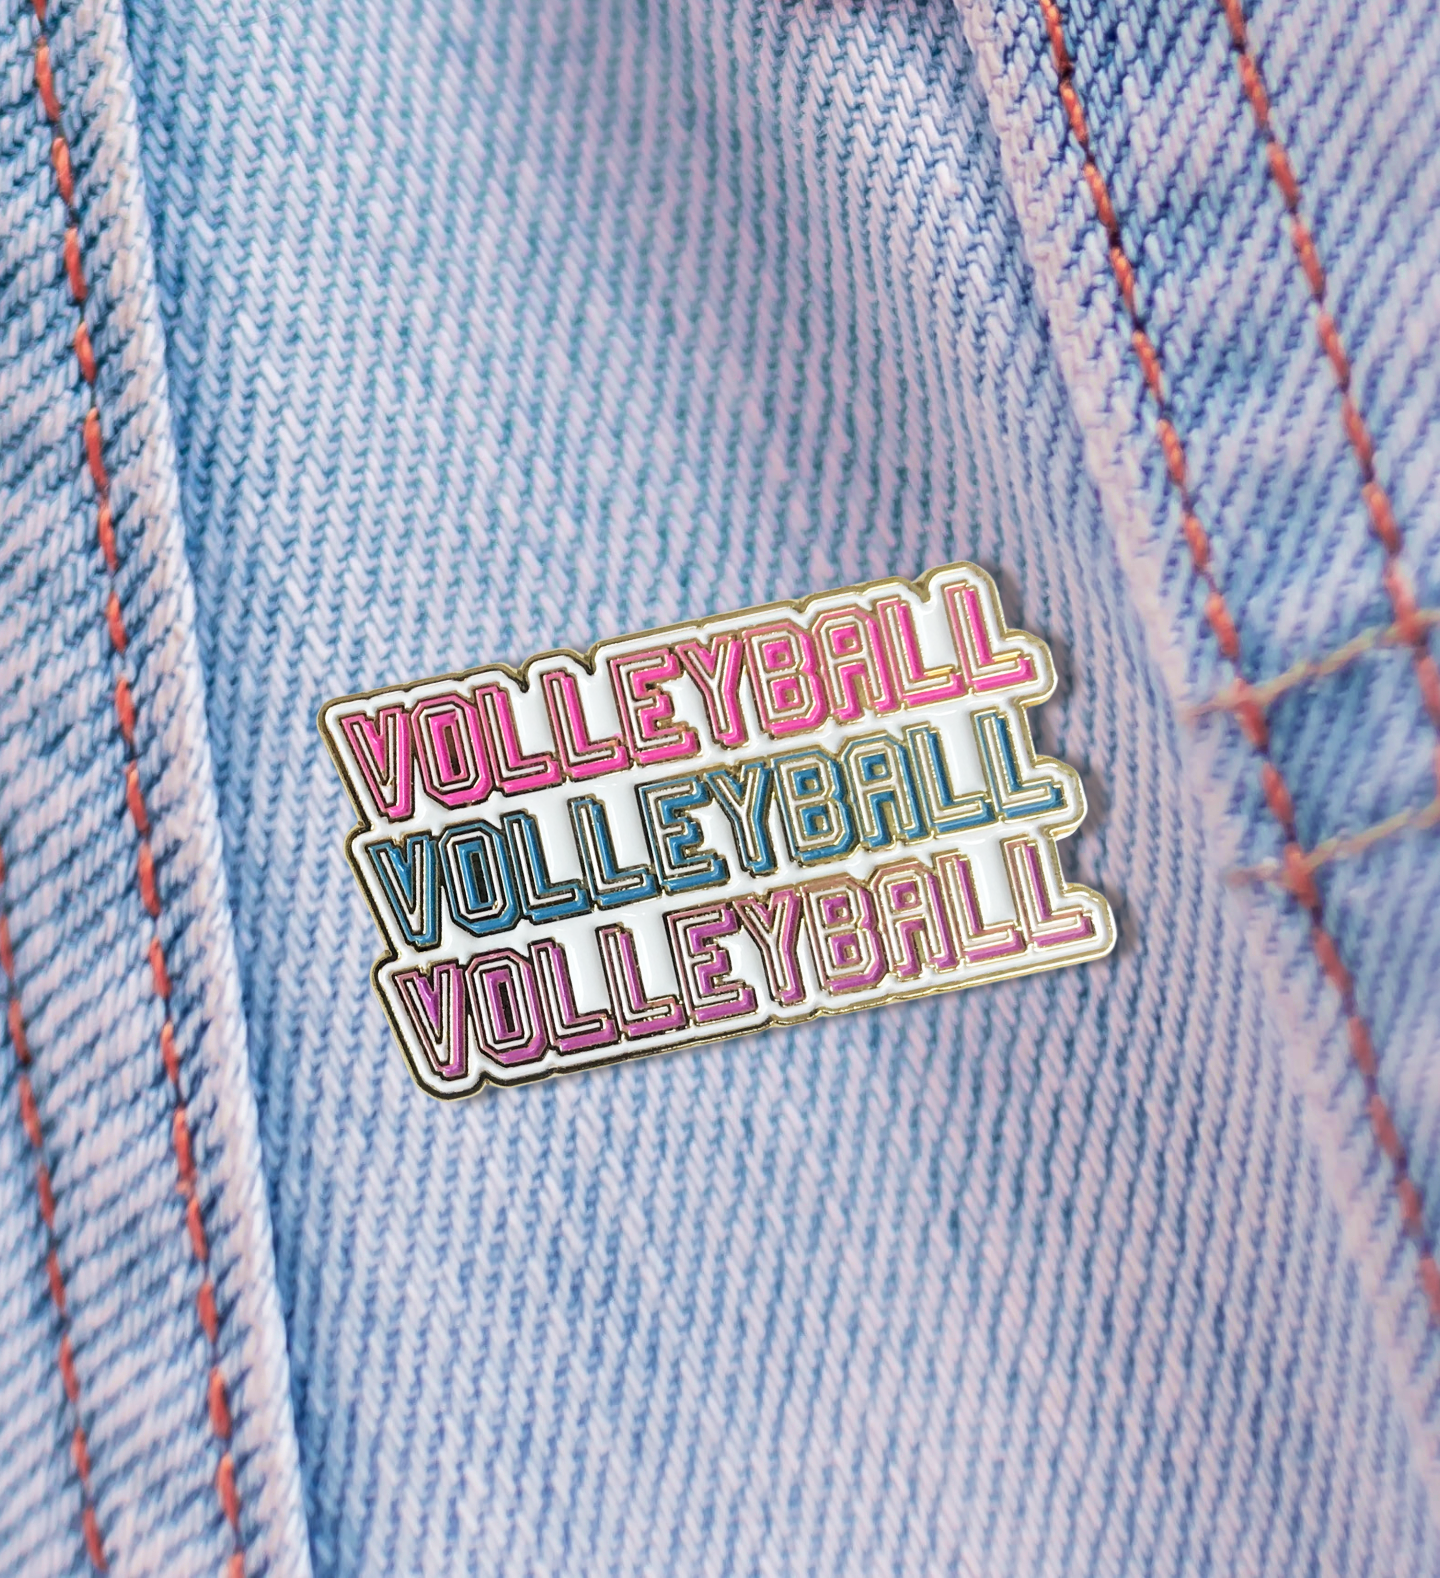 Volleyball Word Stack Enamel Pin